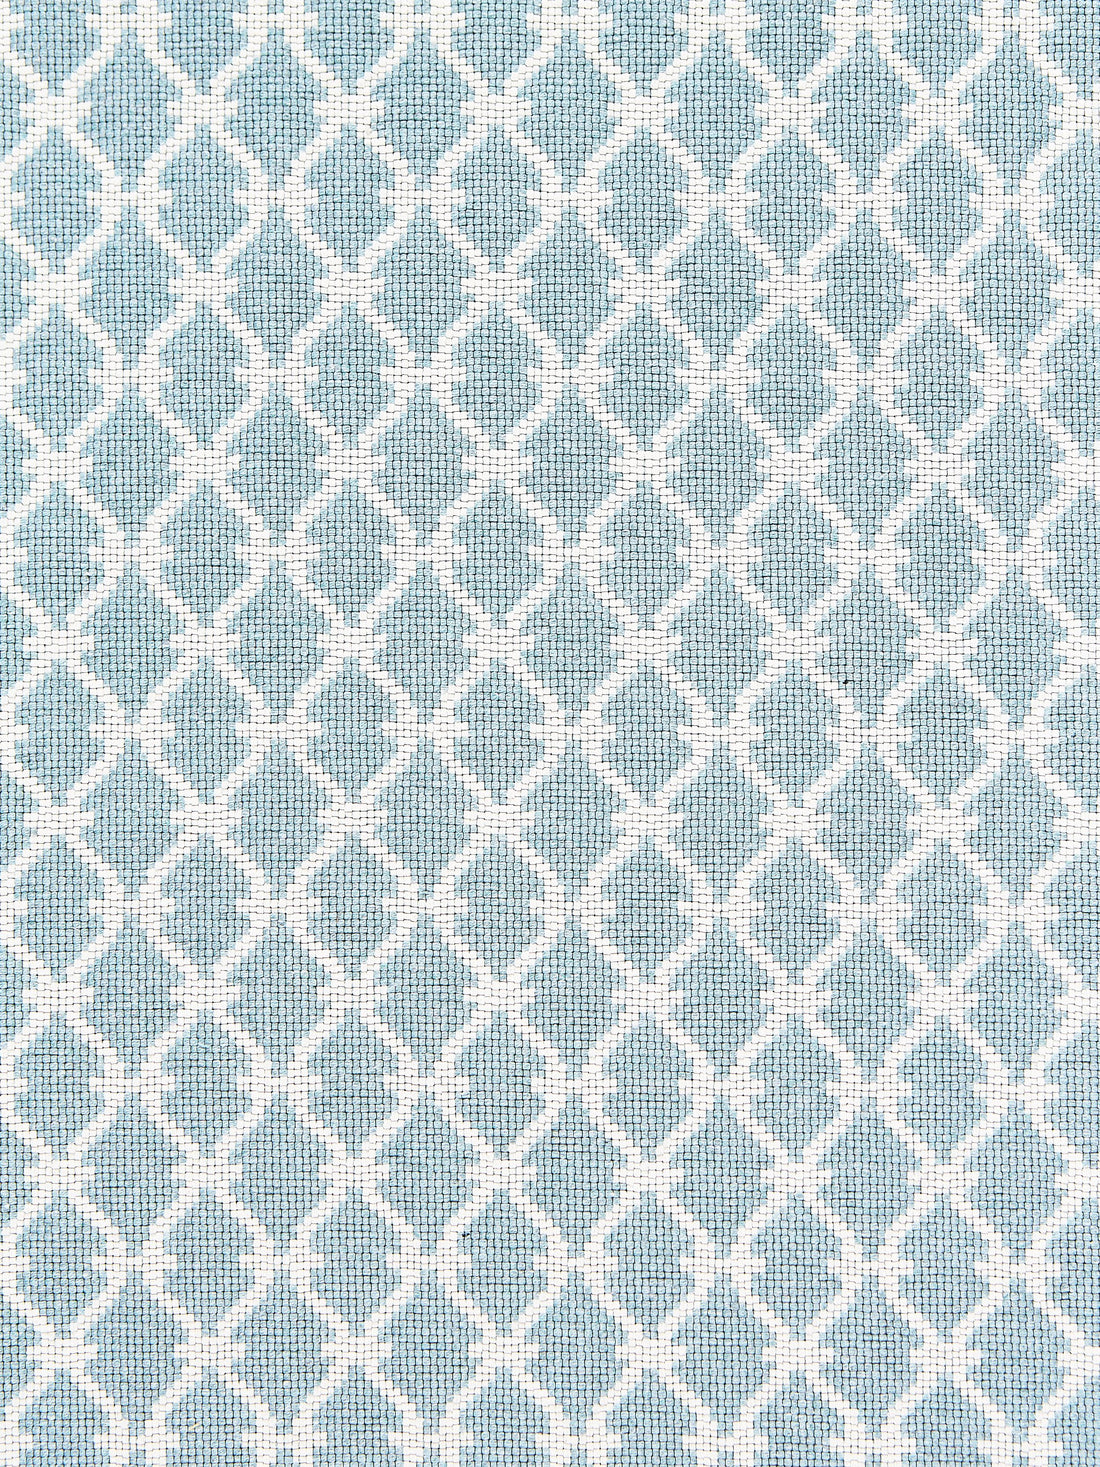 Trellis Weave fabric in sky color - pattern number SC 000327009 - by Scalamandre in the Scalamandre Fabrics Book 1 collection